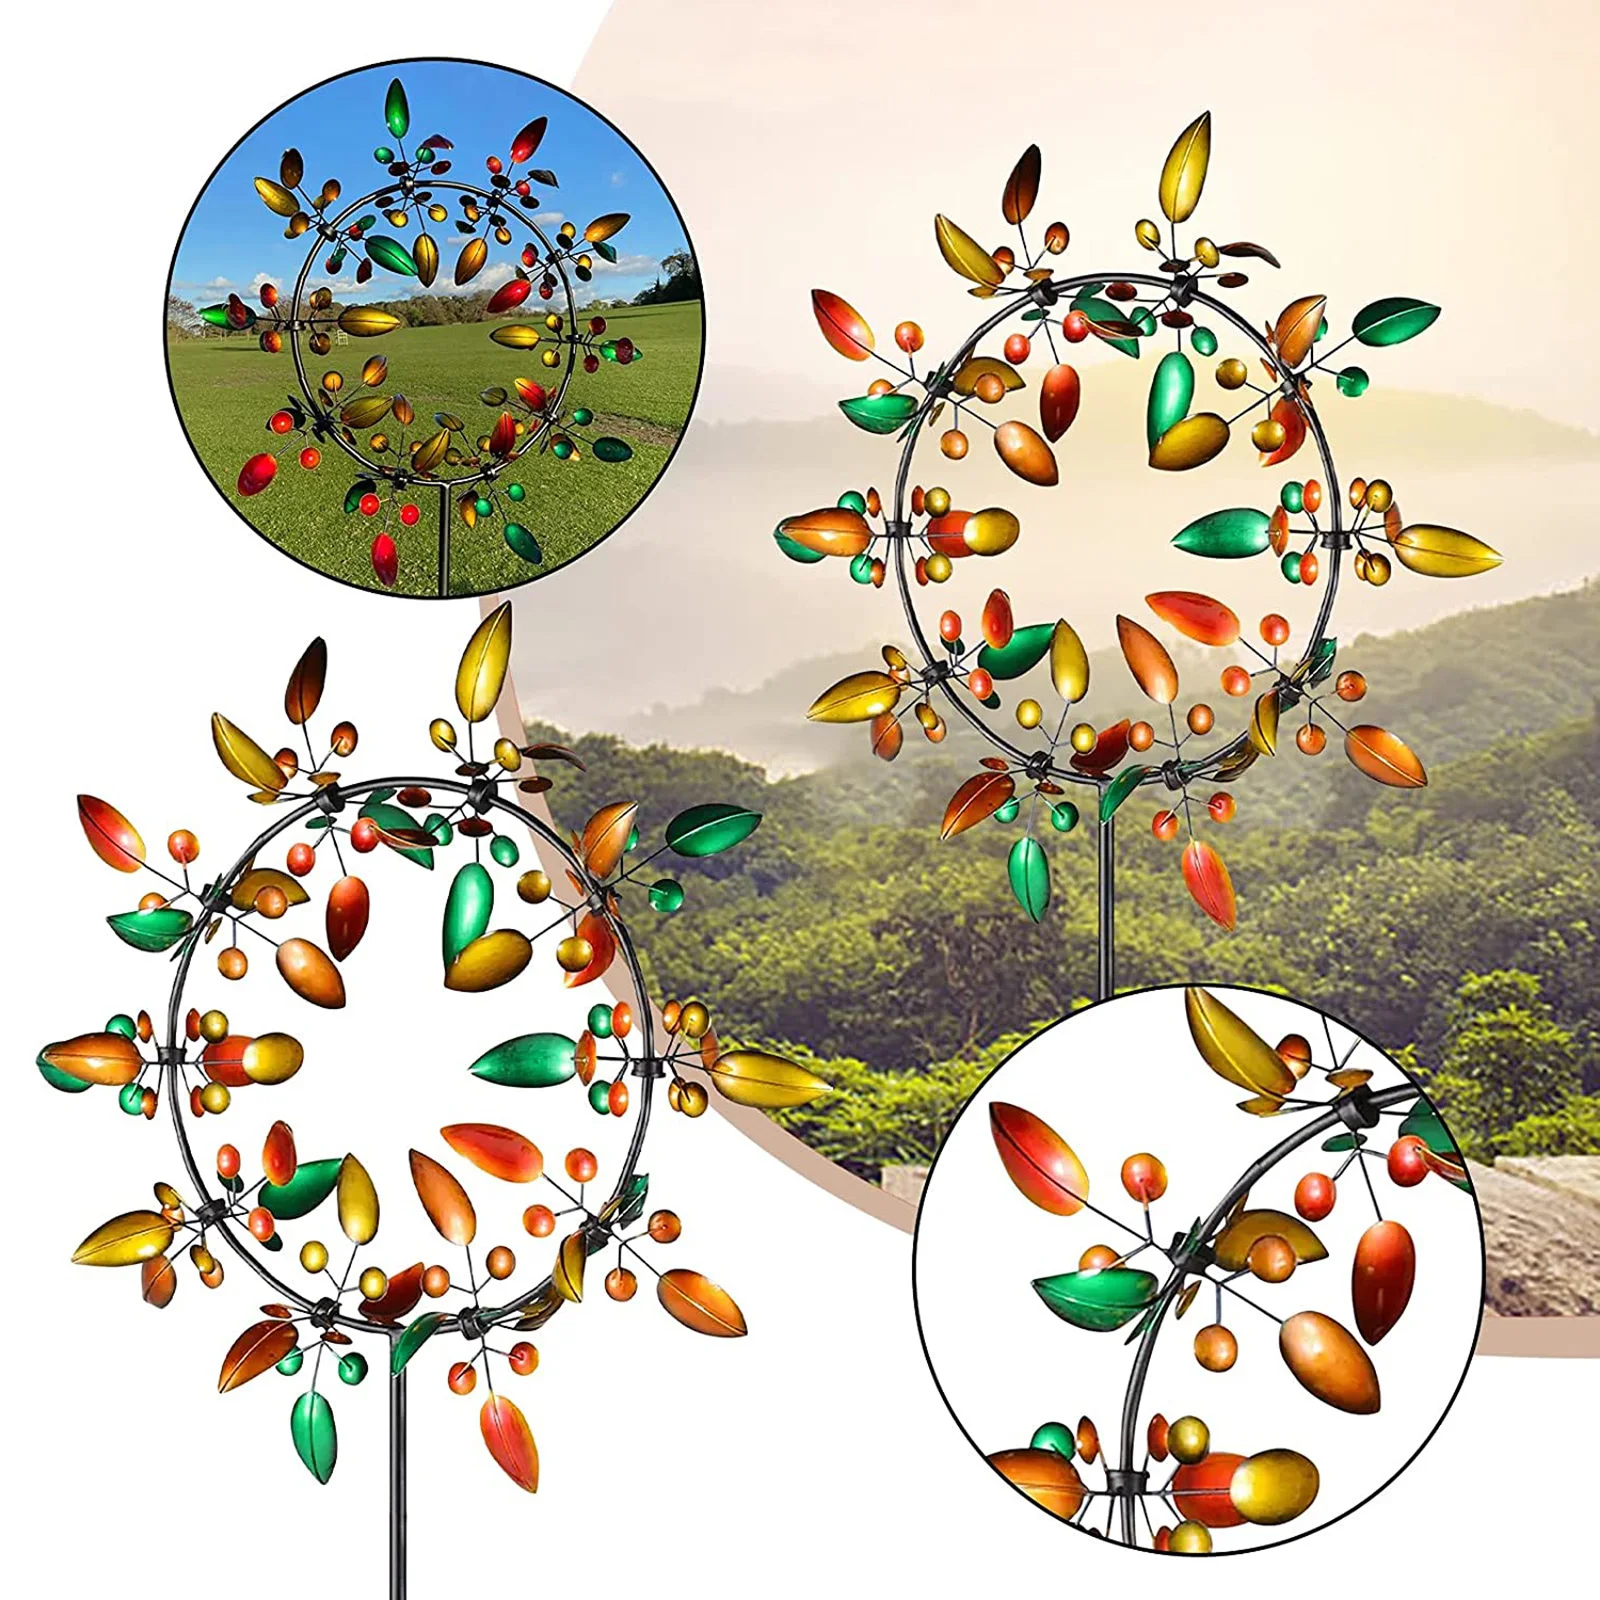 

Newest Metal Windmill Outdoor Unique Magical Wind Spinners Rainbow Leaf Wind Catchers Collectors Yard Lawn Garden Decoration